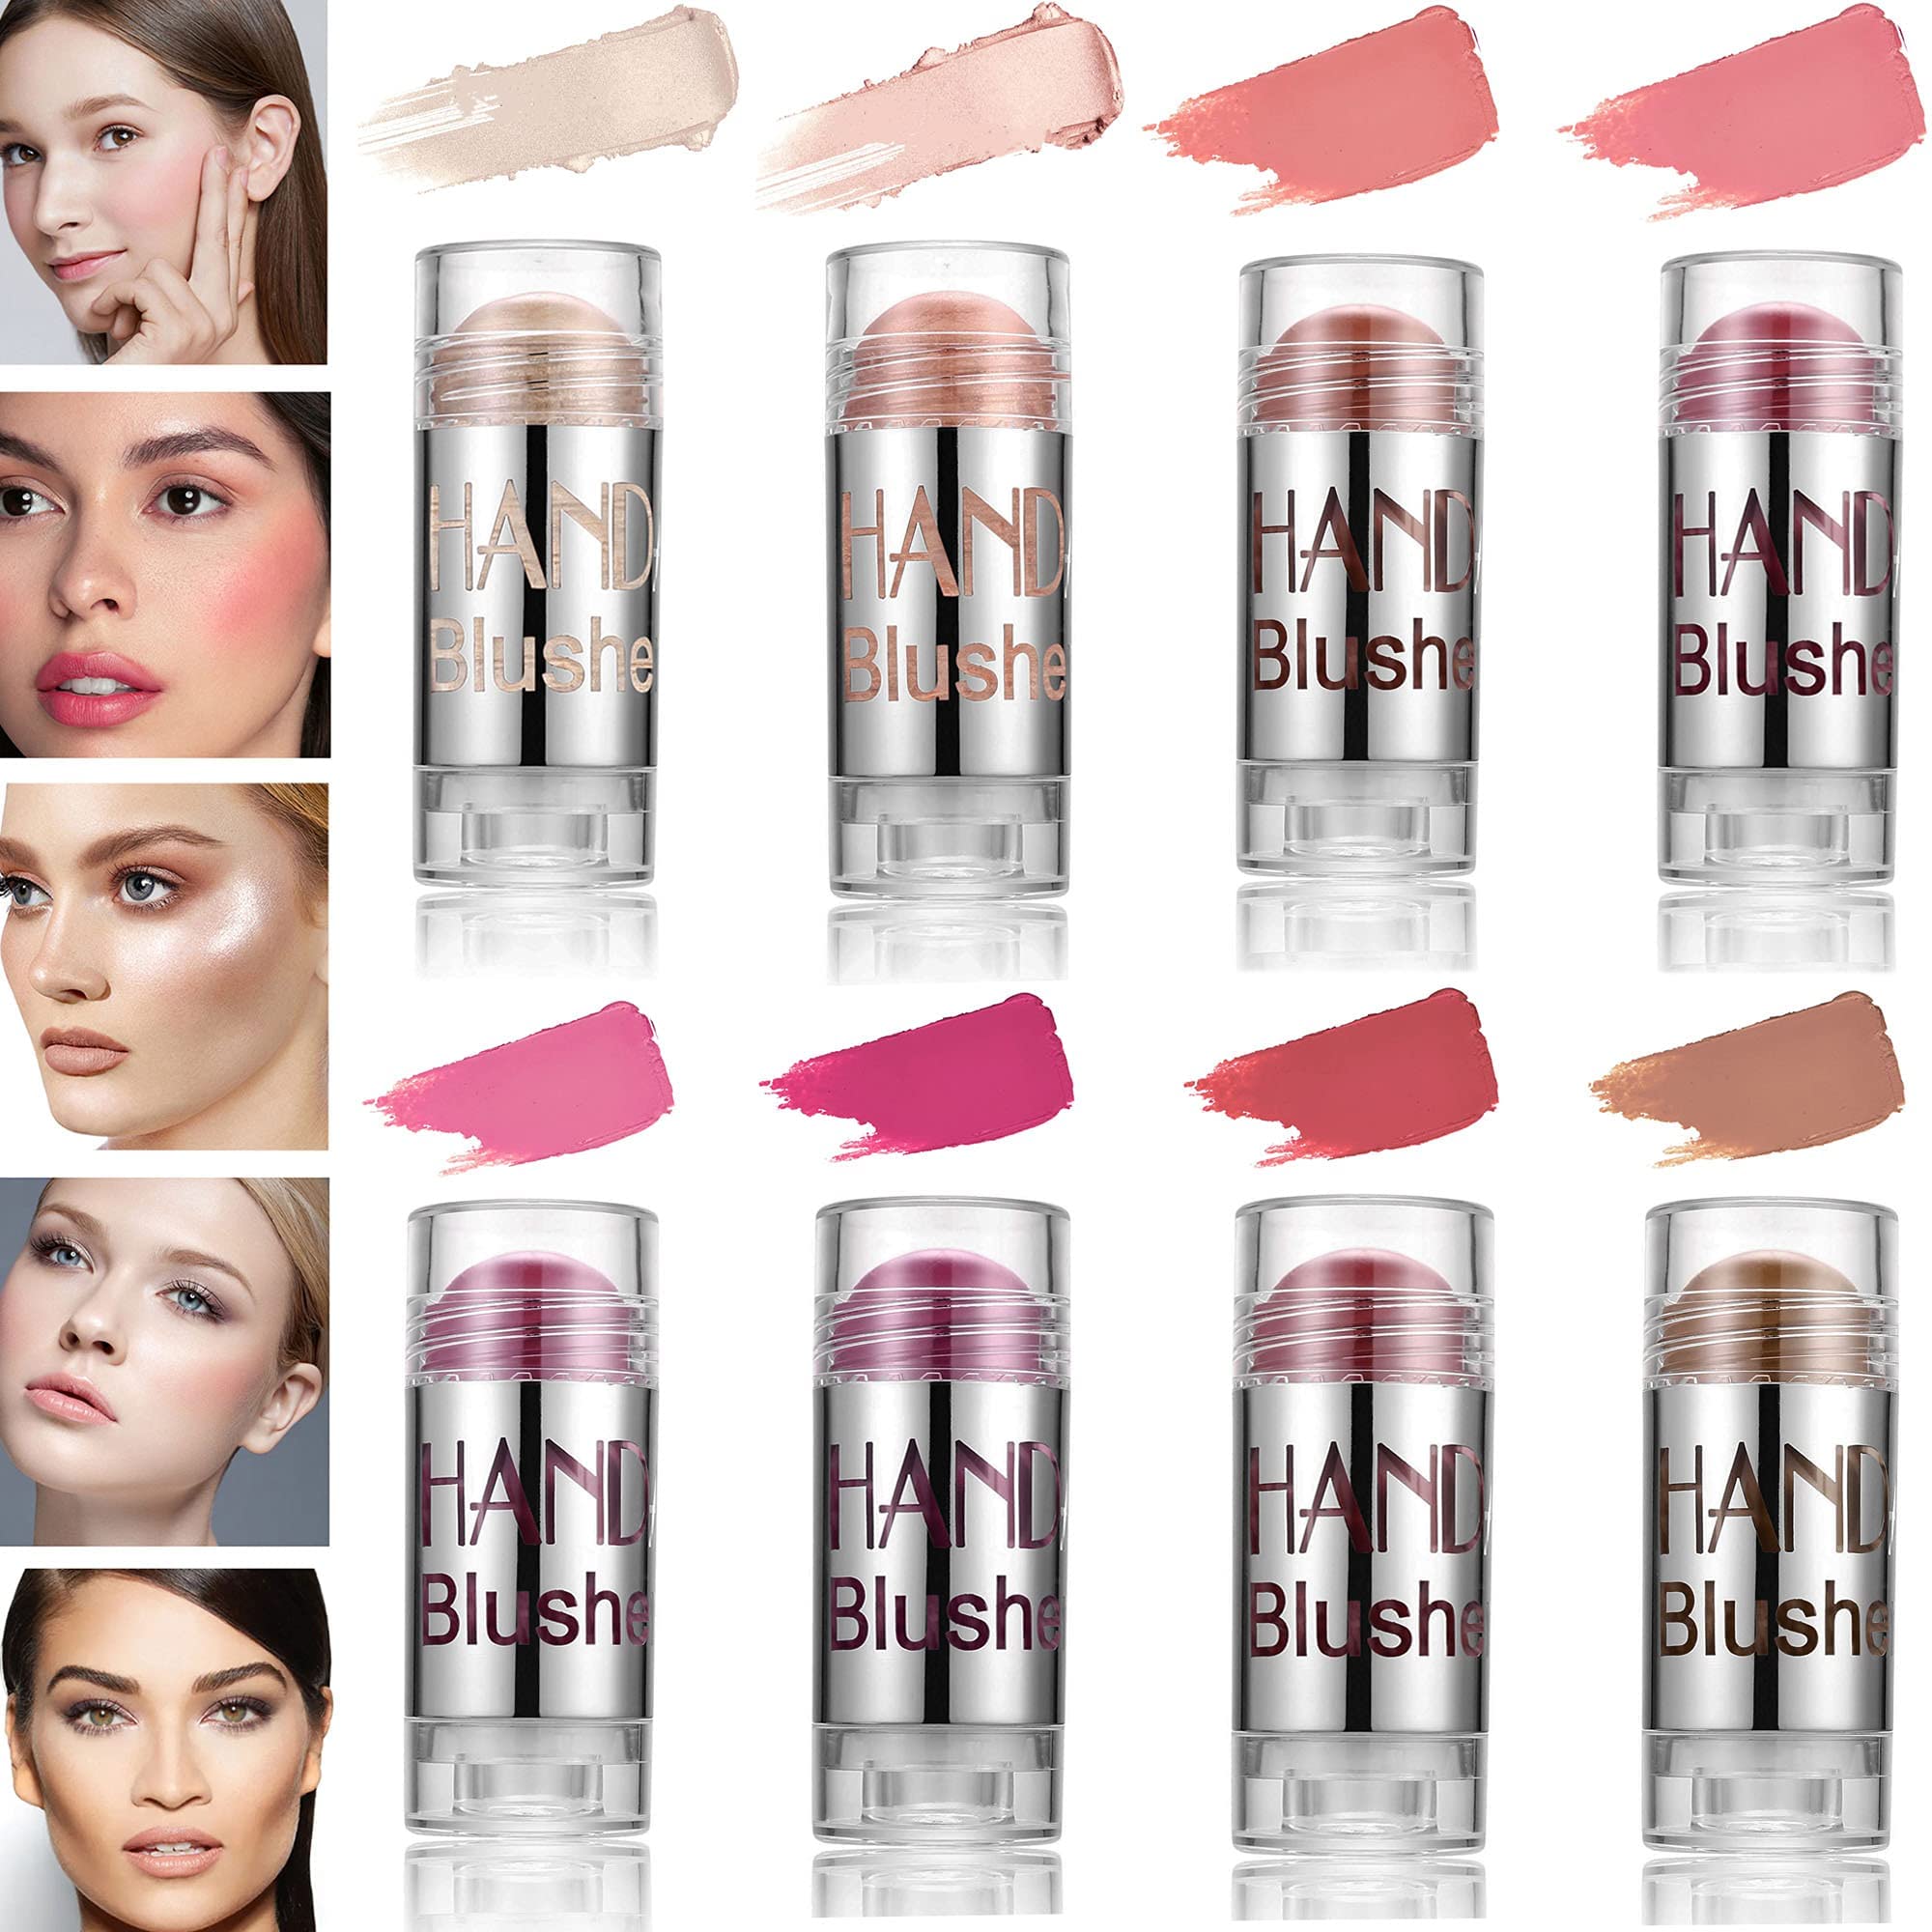 How to Apply Blush Stick in 6 Quick Steps like a Pro – De'lanci Beauty